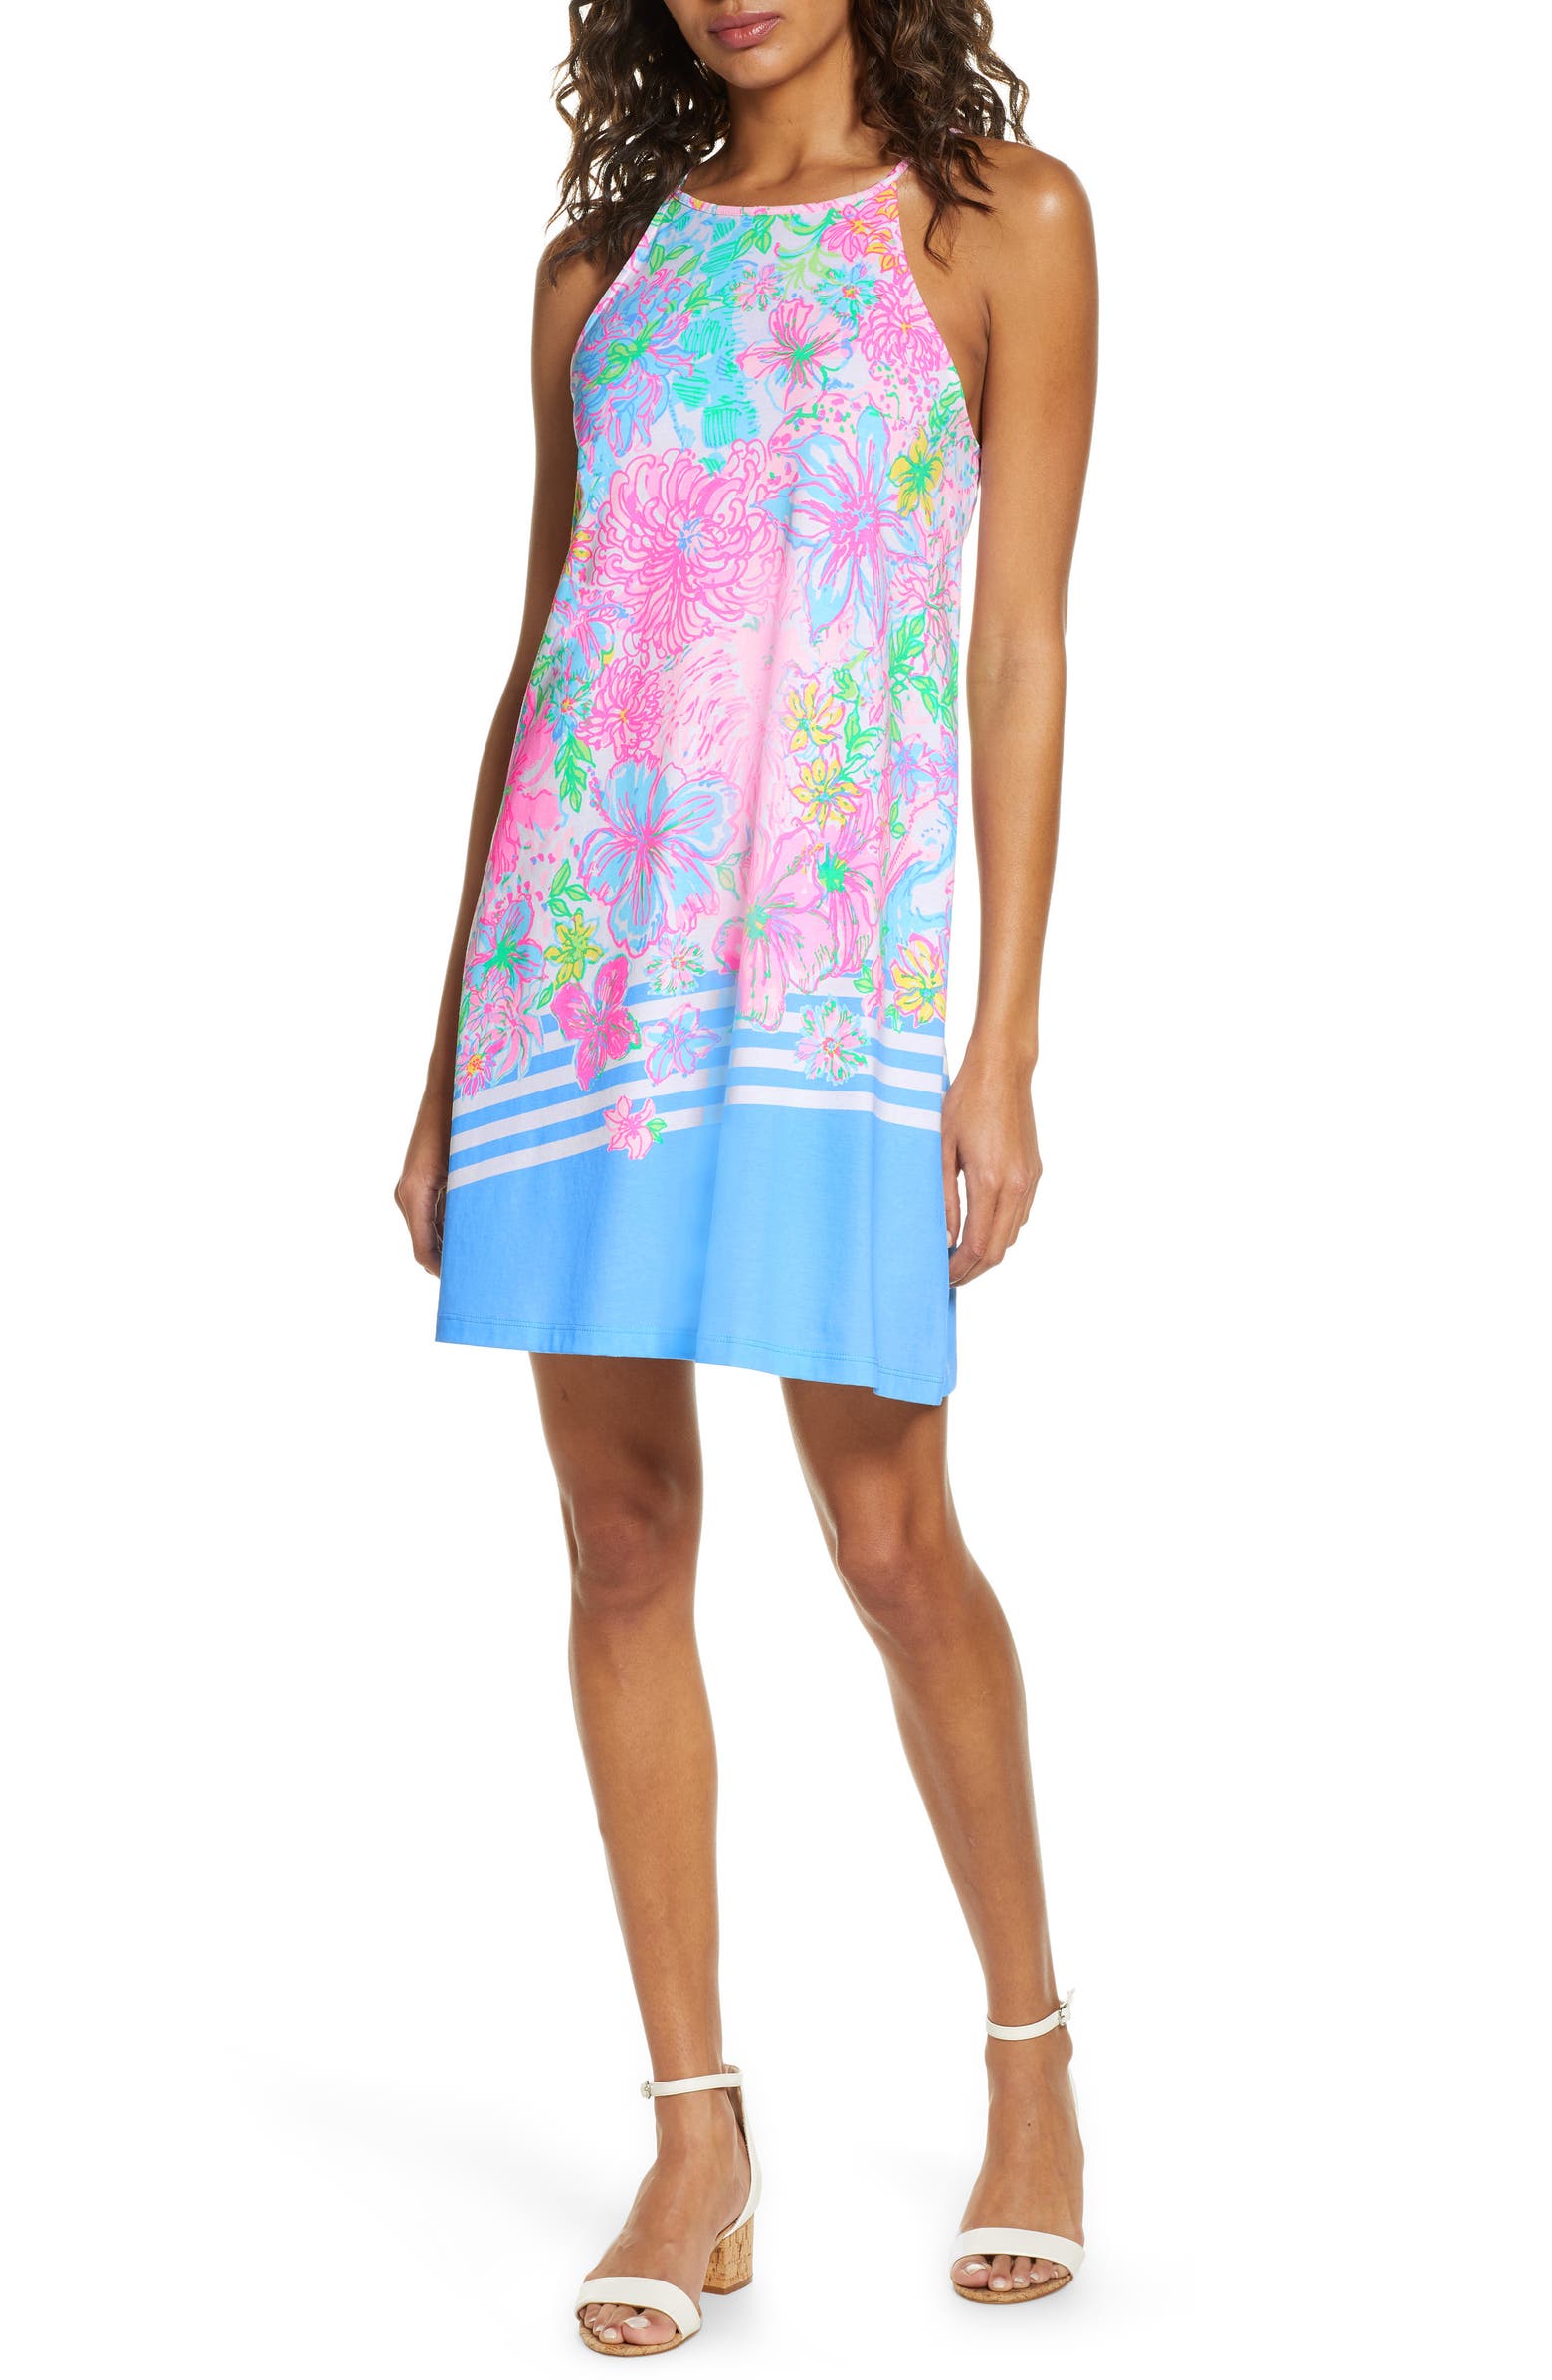 lilly pulitzer dress classic women's clothing